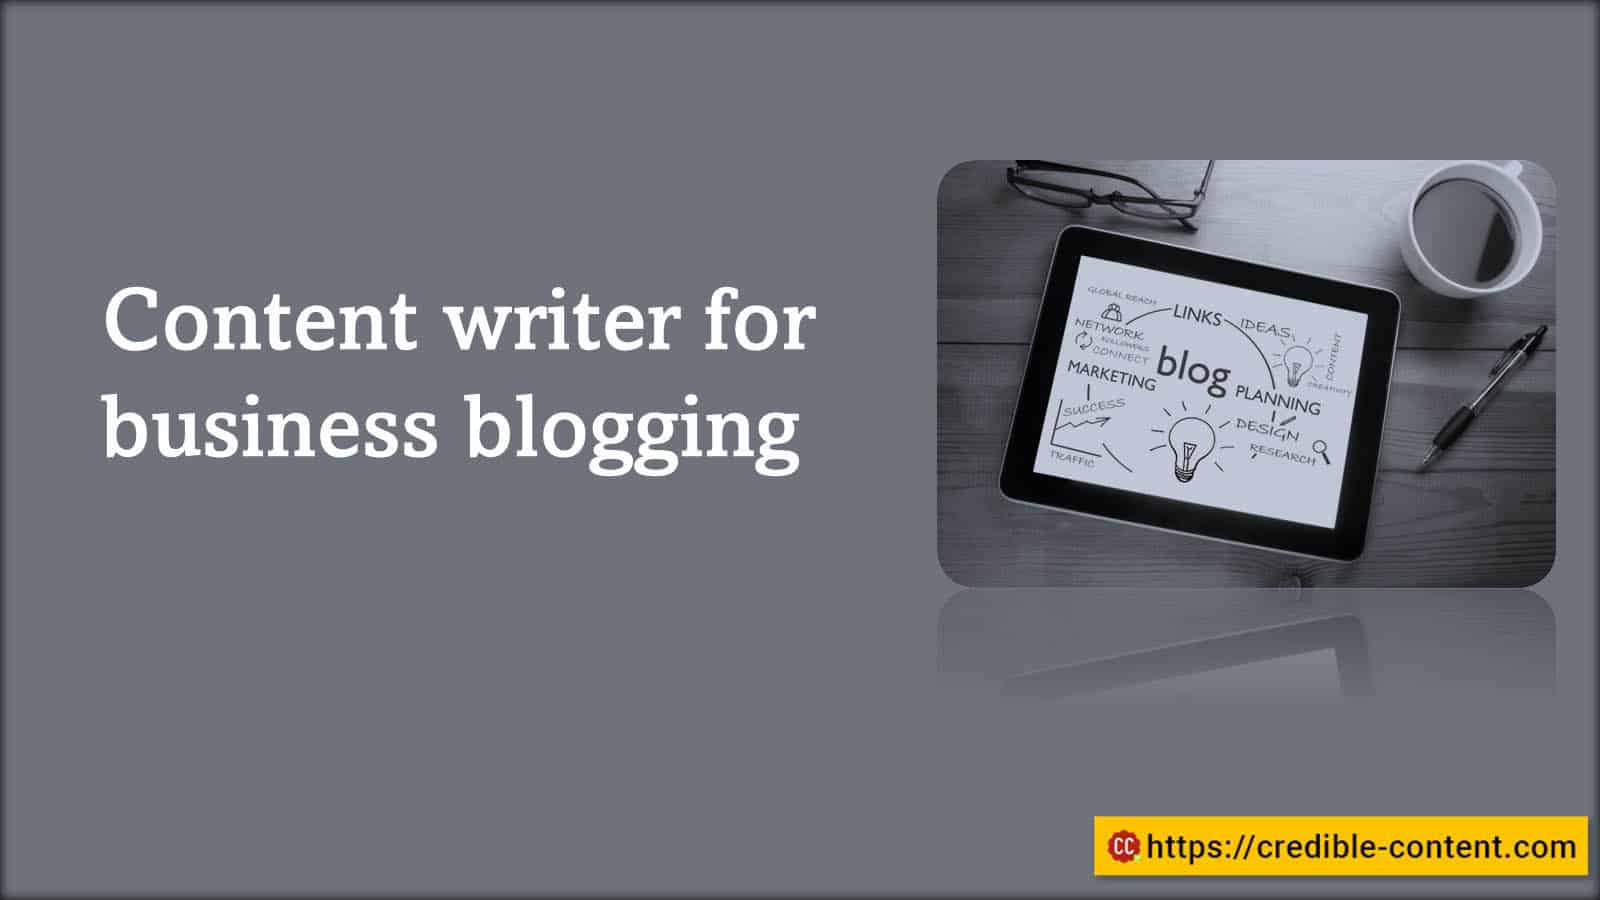 Content writer for business blogging